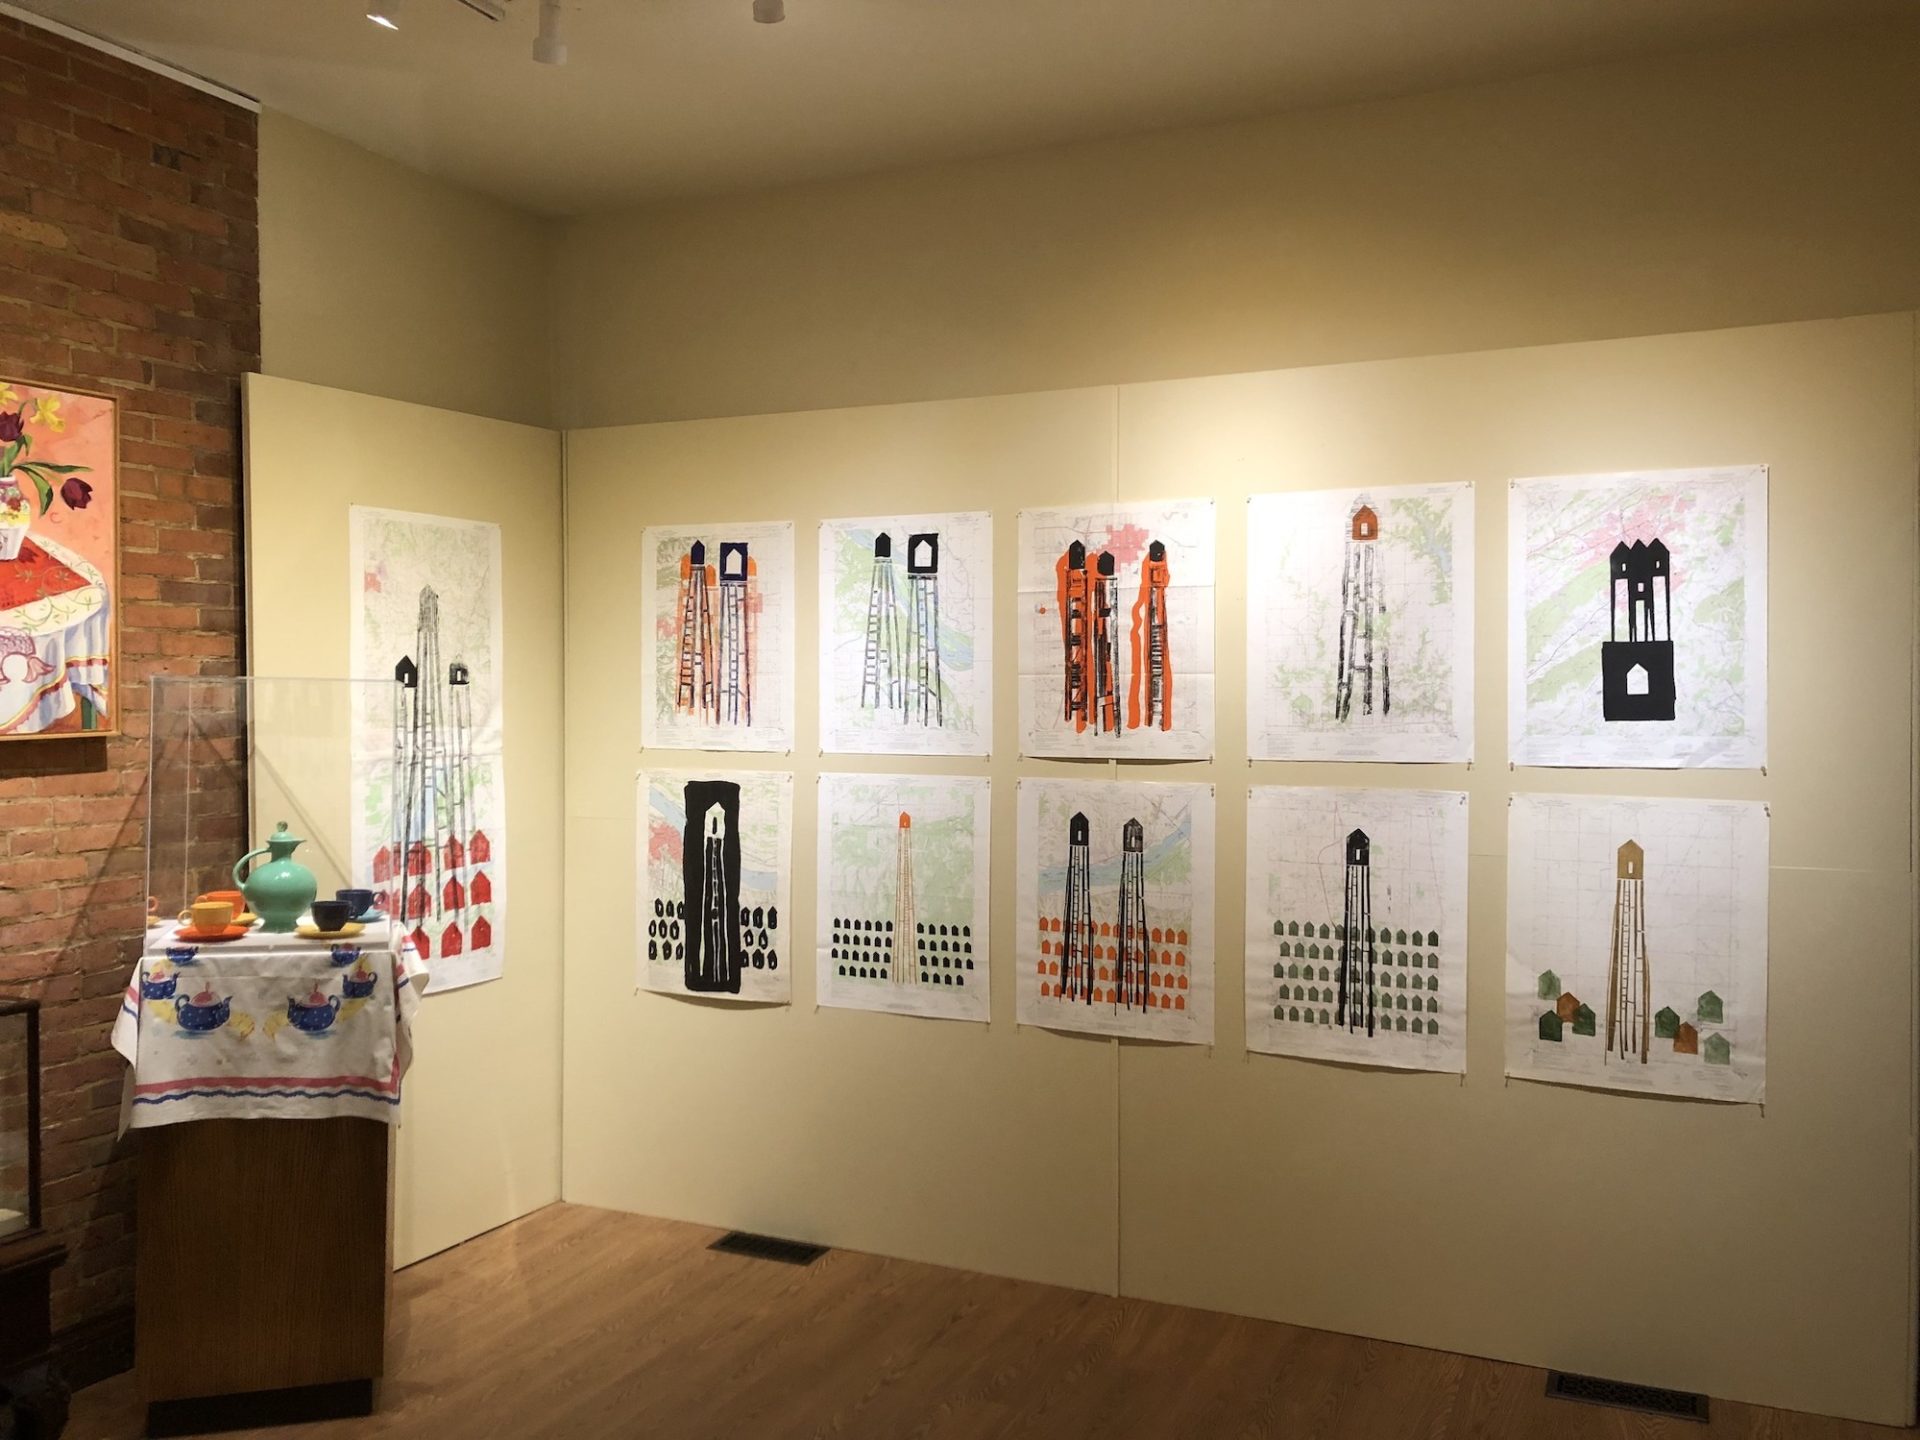 10 of Robb Springfield's Stilt Houses creations are on a gallery wall in 2 rows of 5 works each. The stilt house images are large and bold in black, red, orange, and blue. The background of each picture is an Illinois map. 